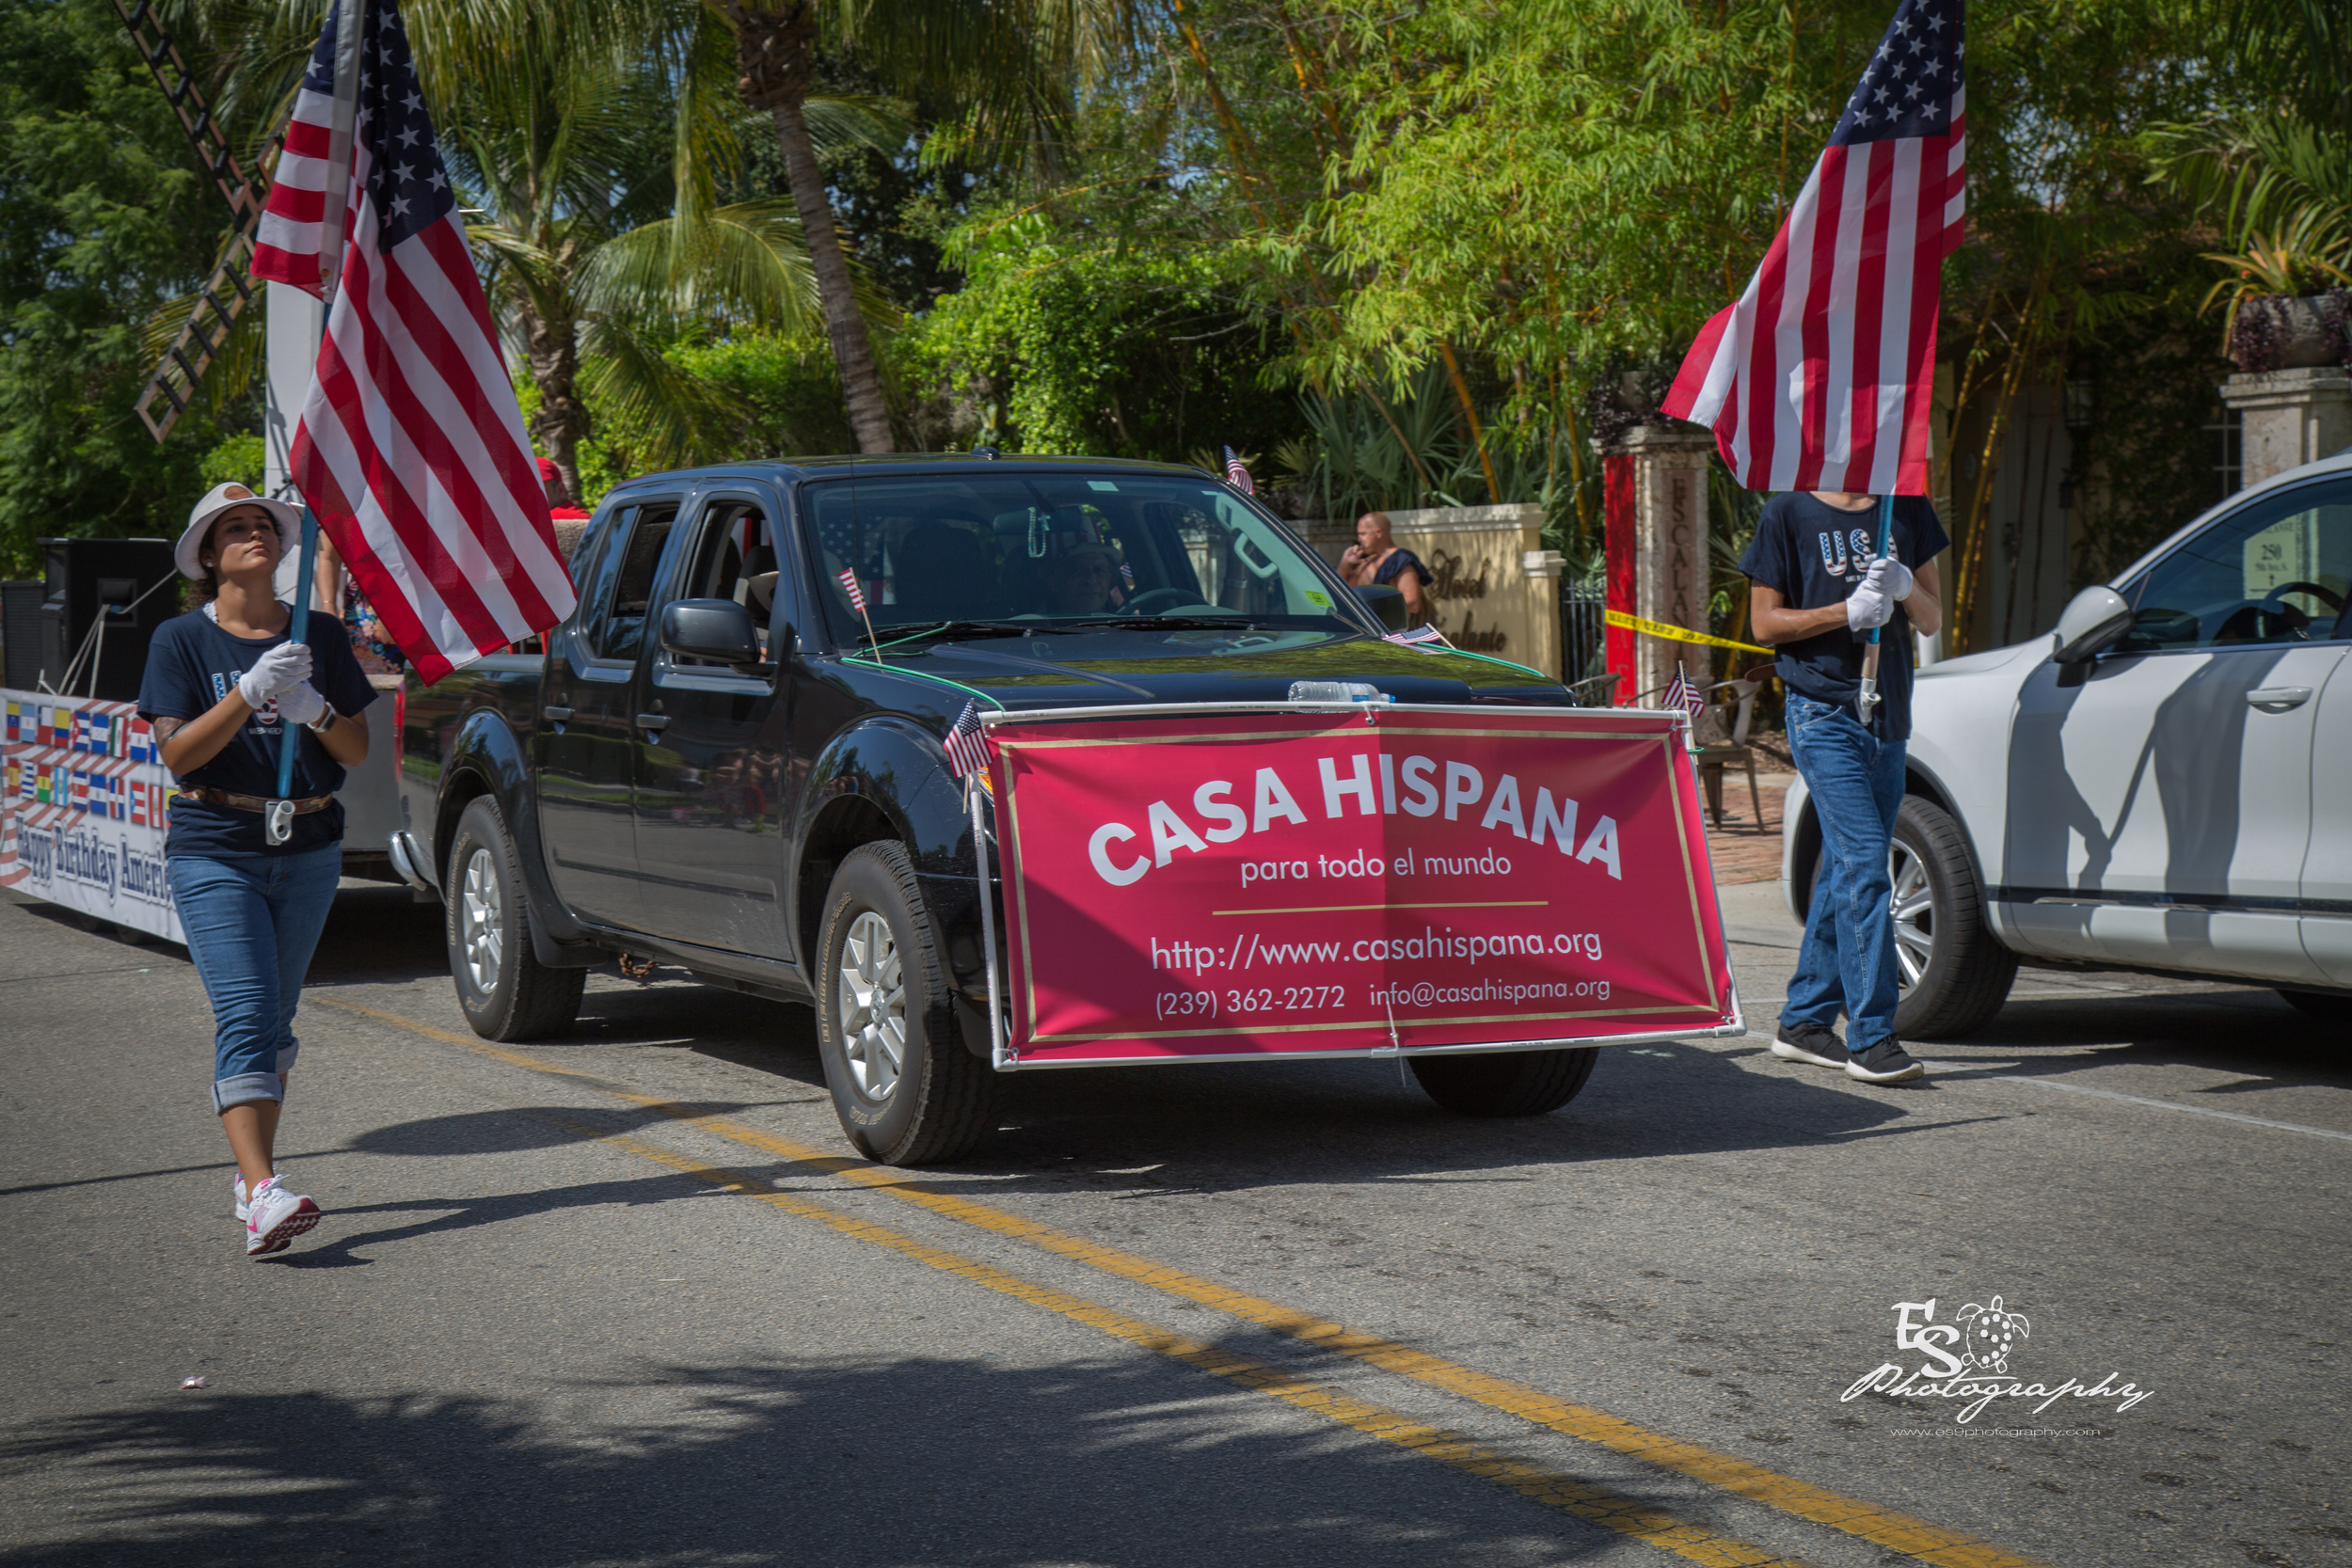 City of Naples July 4th Parade 2016 @ ES9 Photography 2016-107.jpg